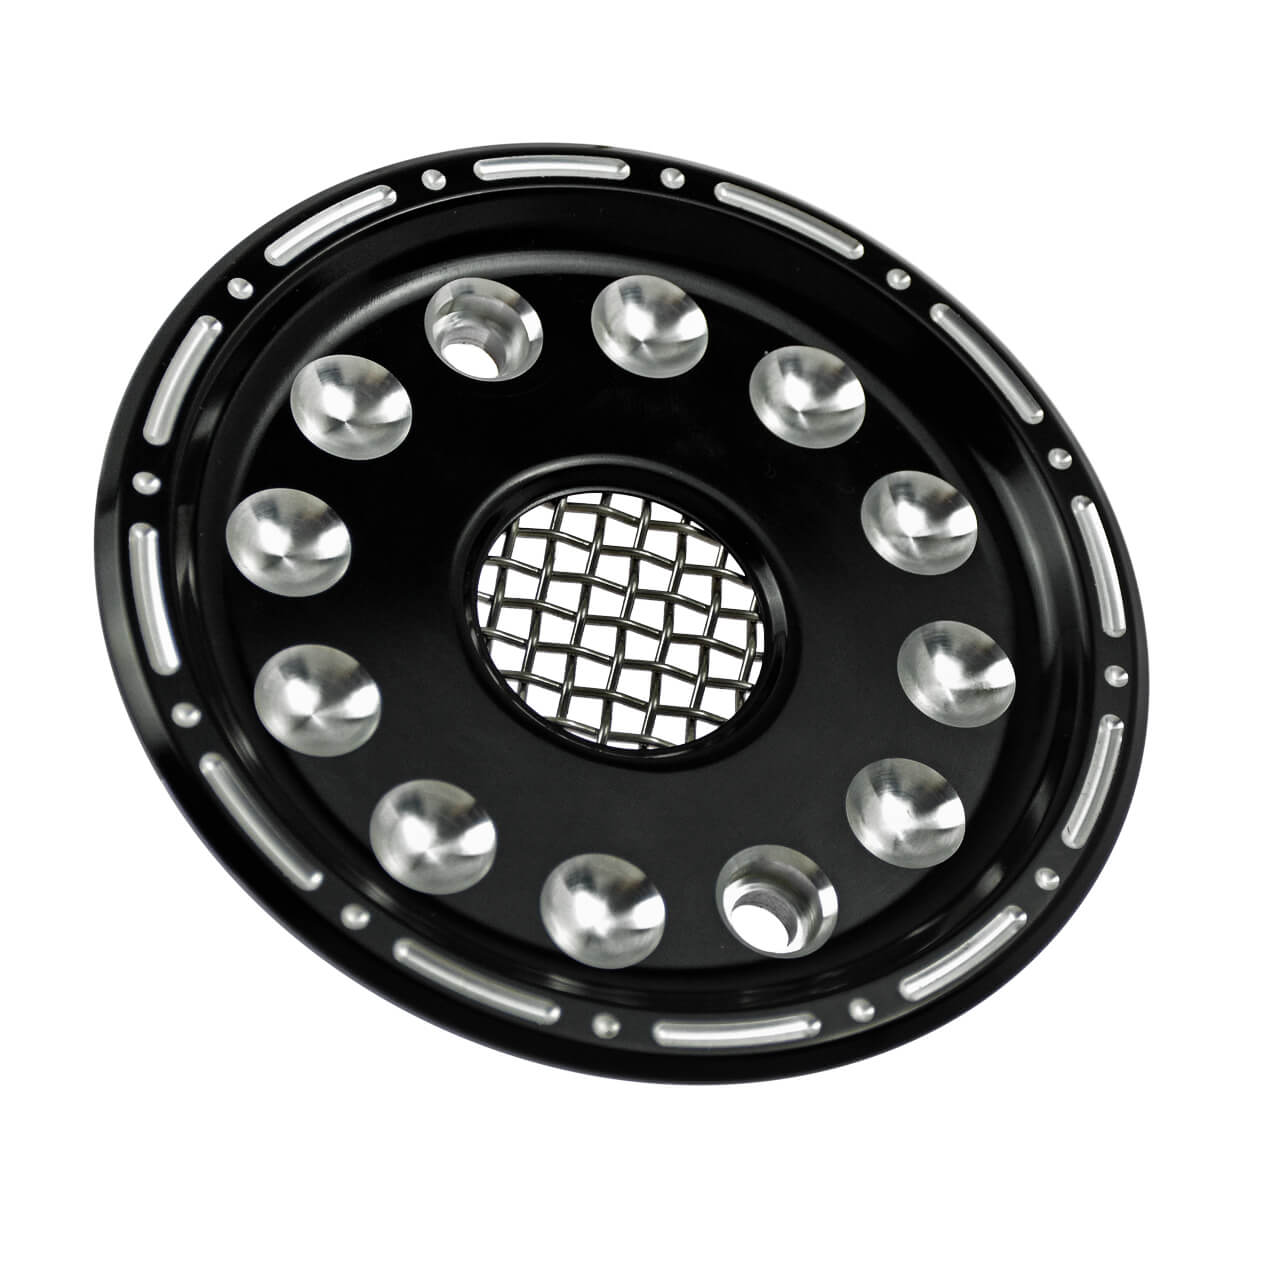 Front Pulley Cover Fit For Harley Sportster XL Iron 883 1200 72 2004-2022 | Mactions